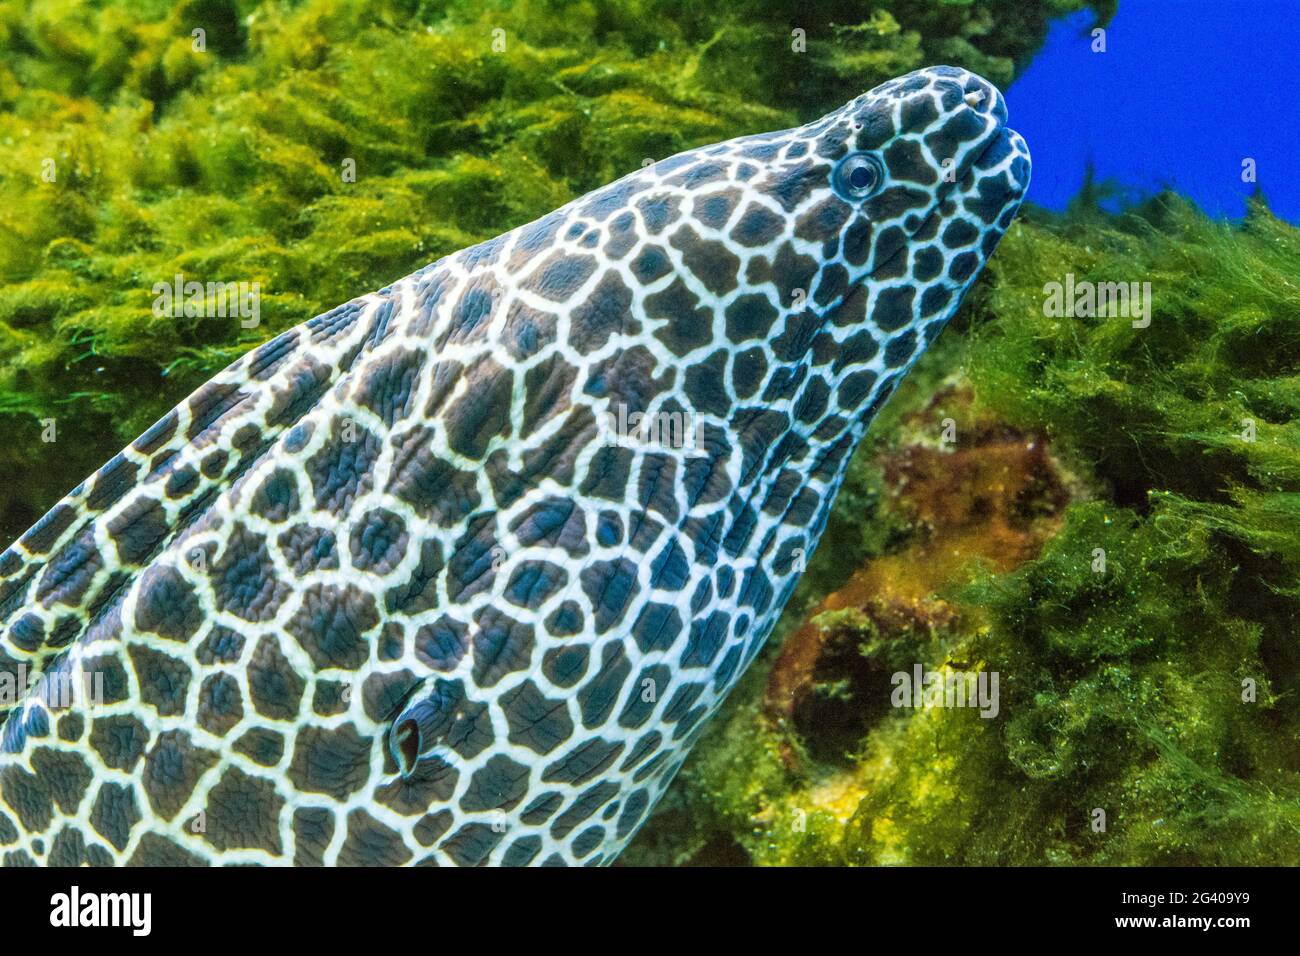 Laced / leopard moray in Indian ocean during a scuba dive Stock Photo